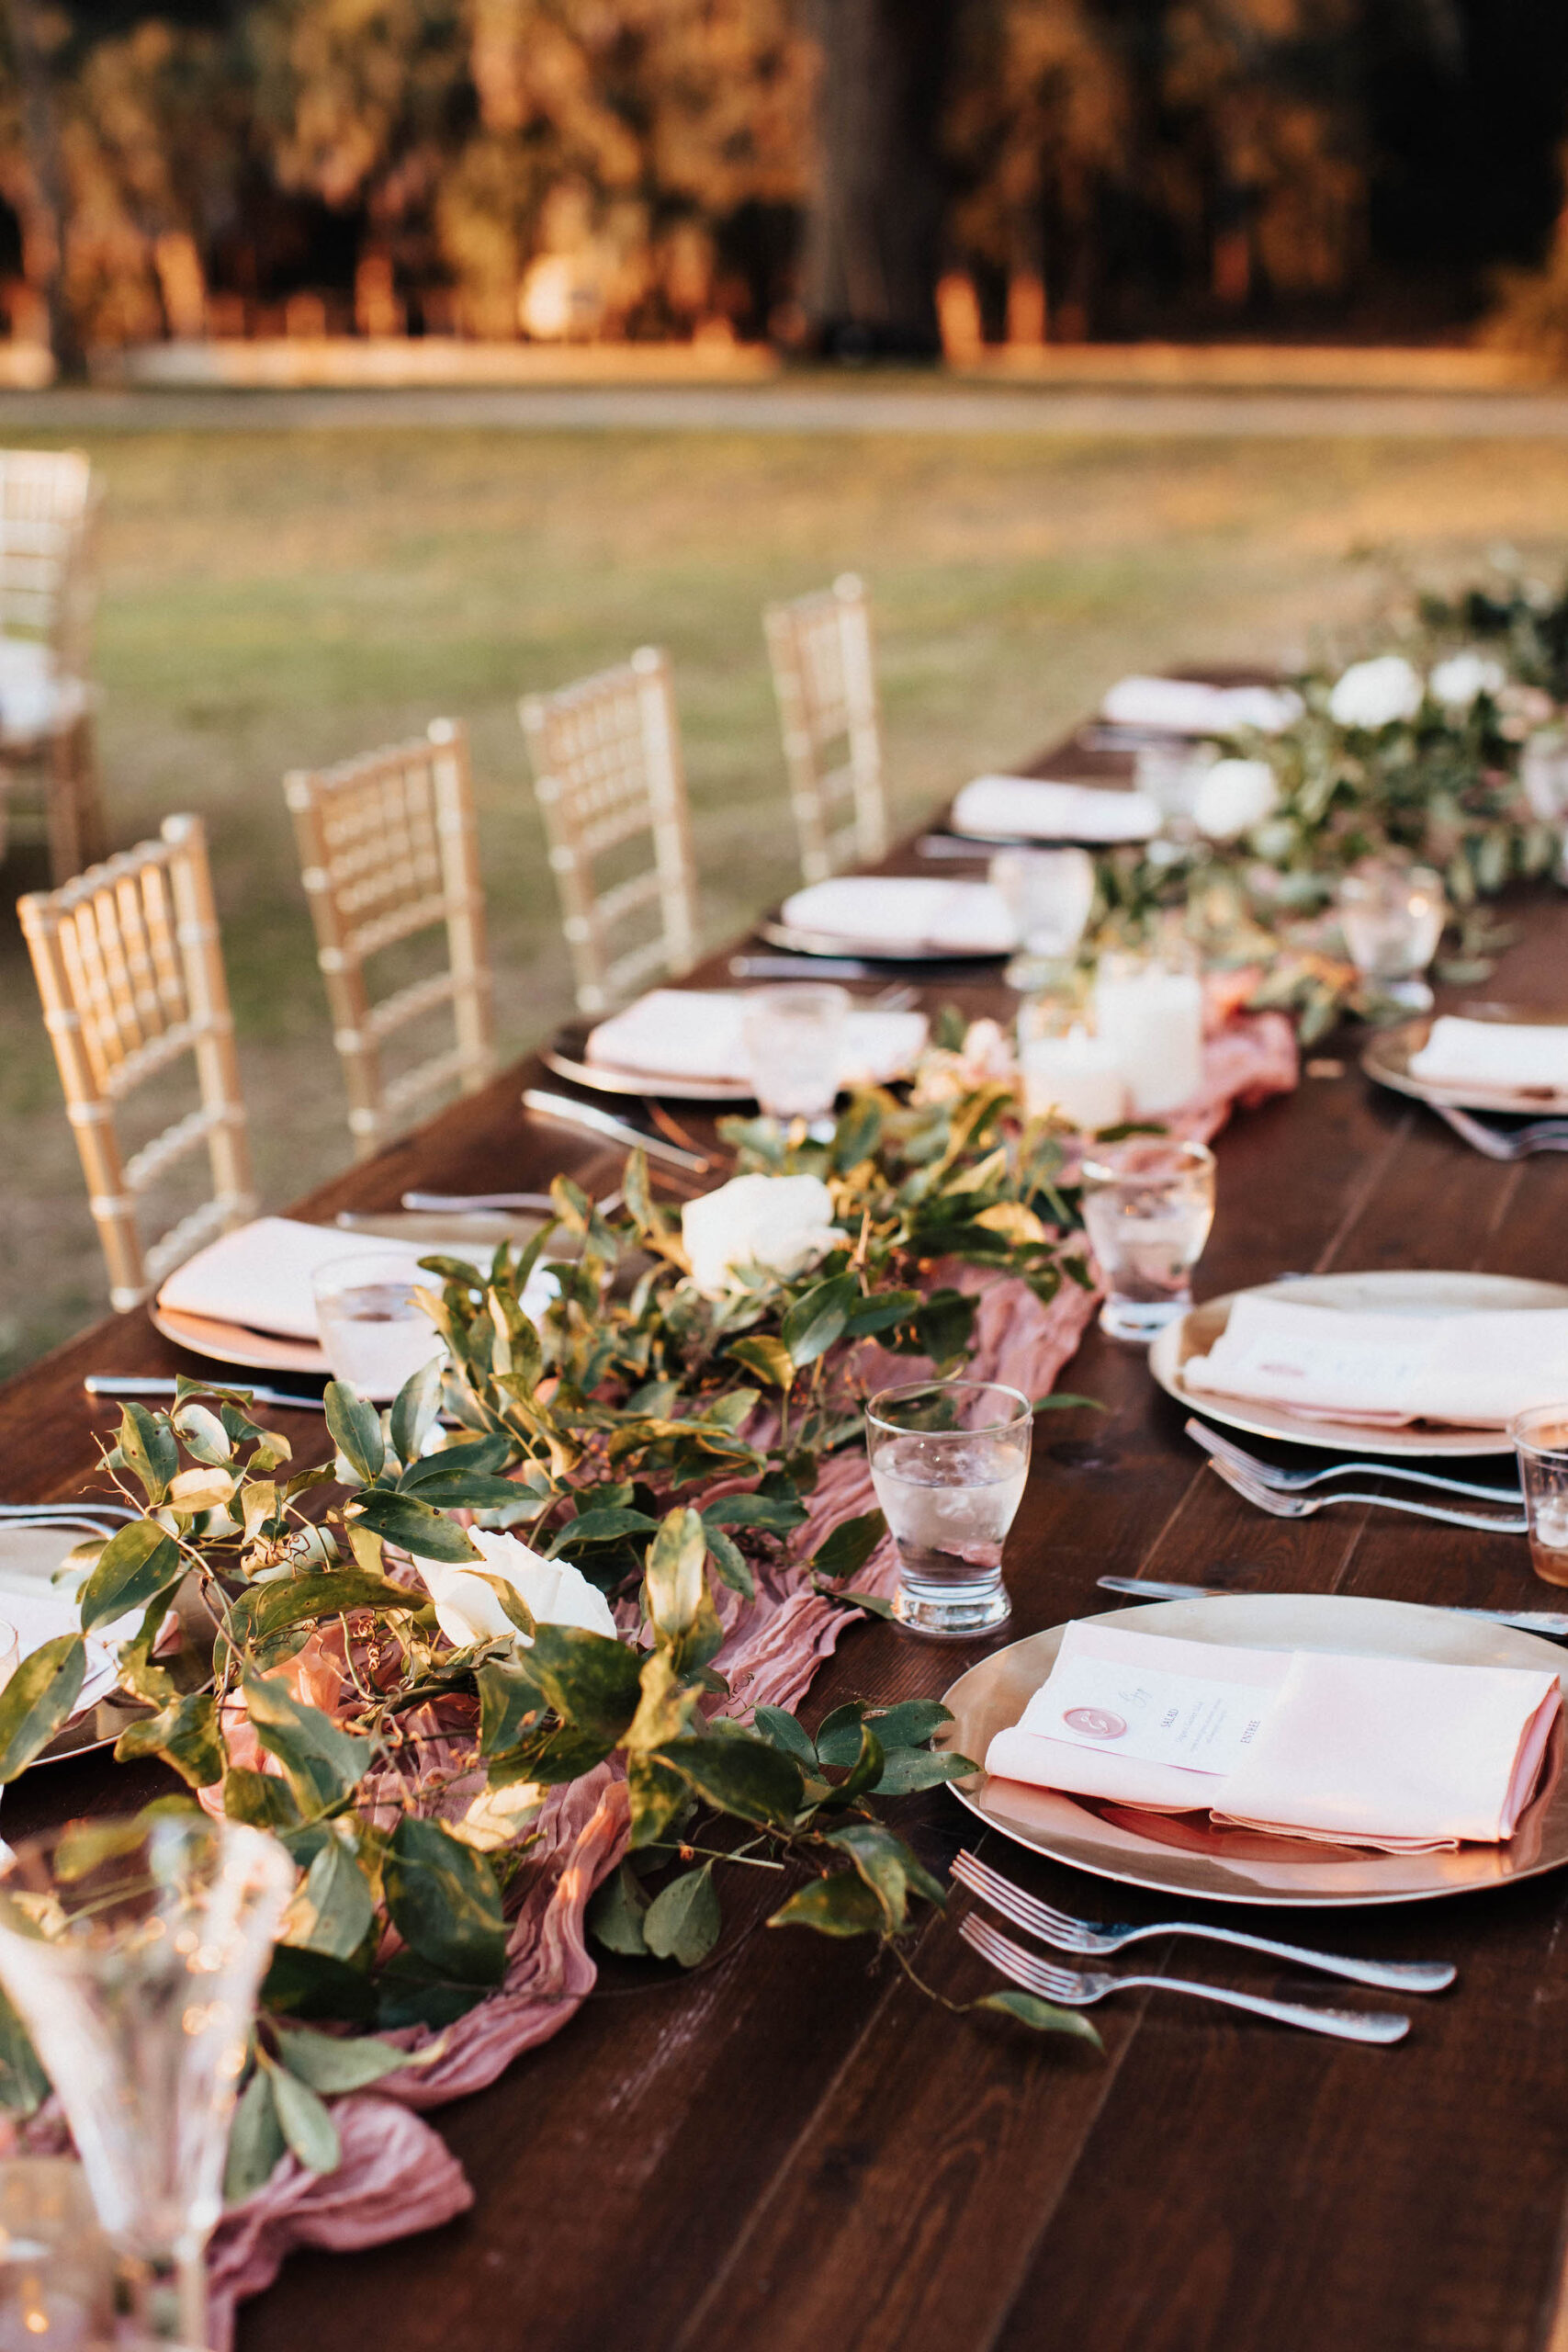 Wooden Tablescape with Greenery Details and Golden Touches | Romantic Outdoor Garden Wedding Reception